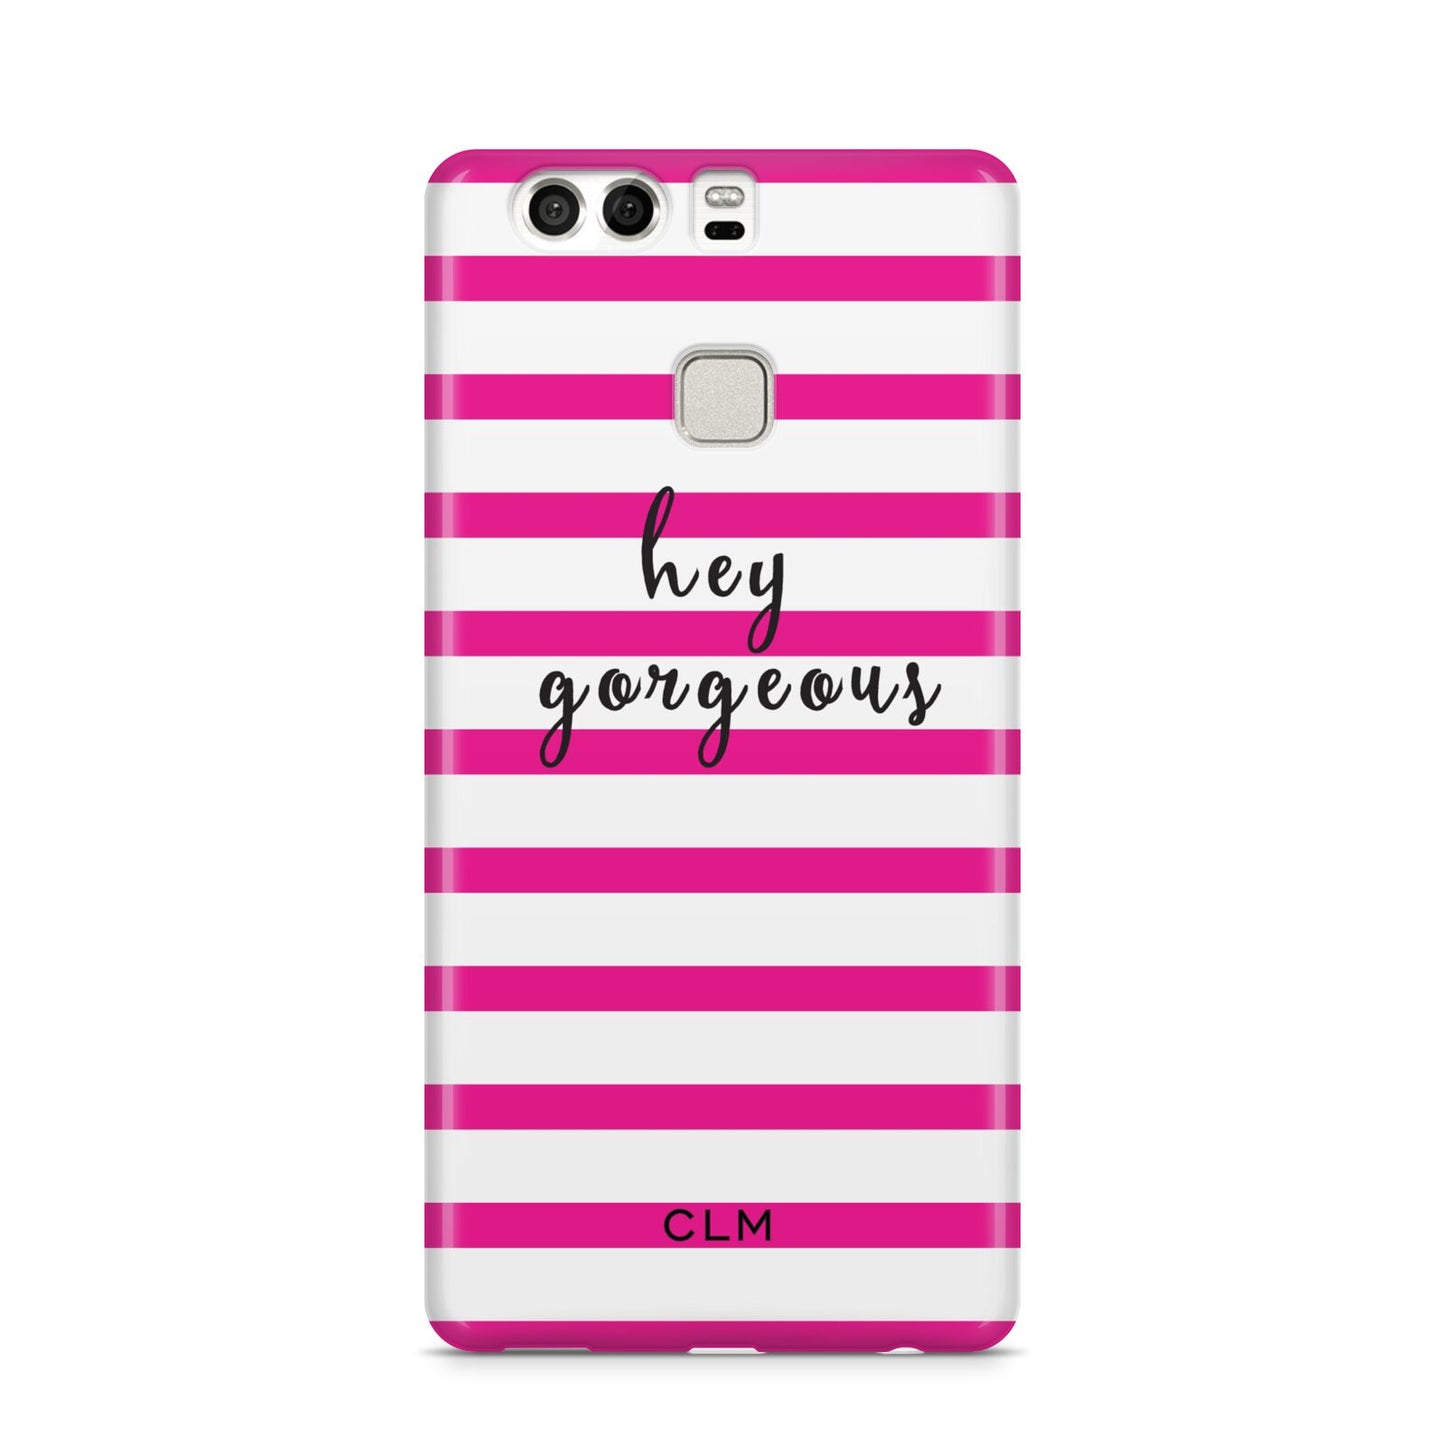 Personalised Initials Pink Striped Huawei P9 Case